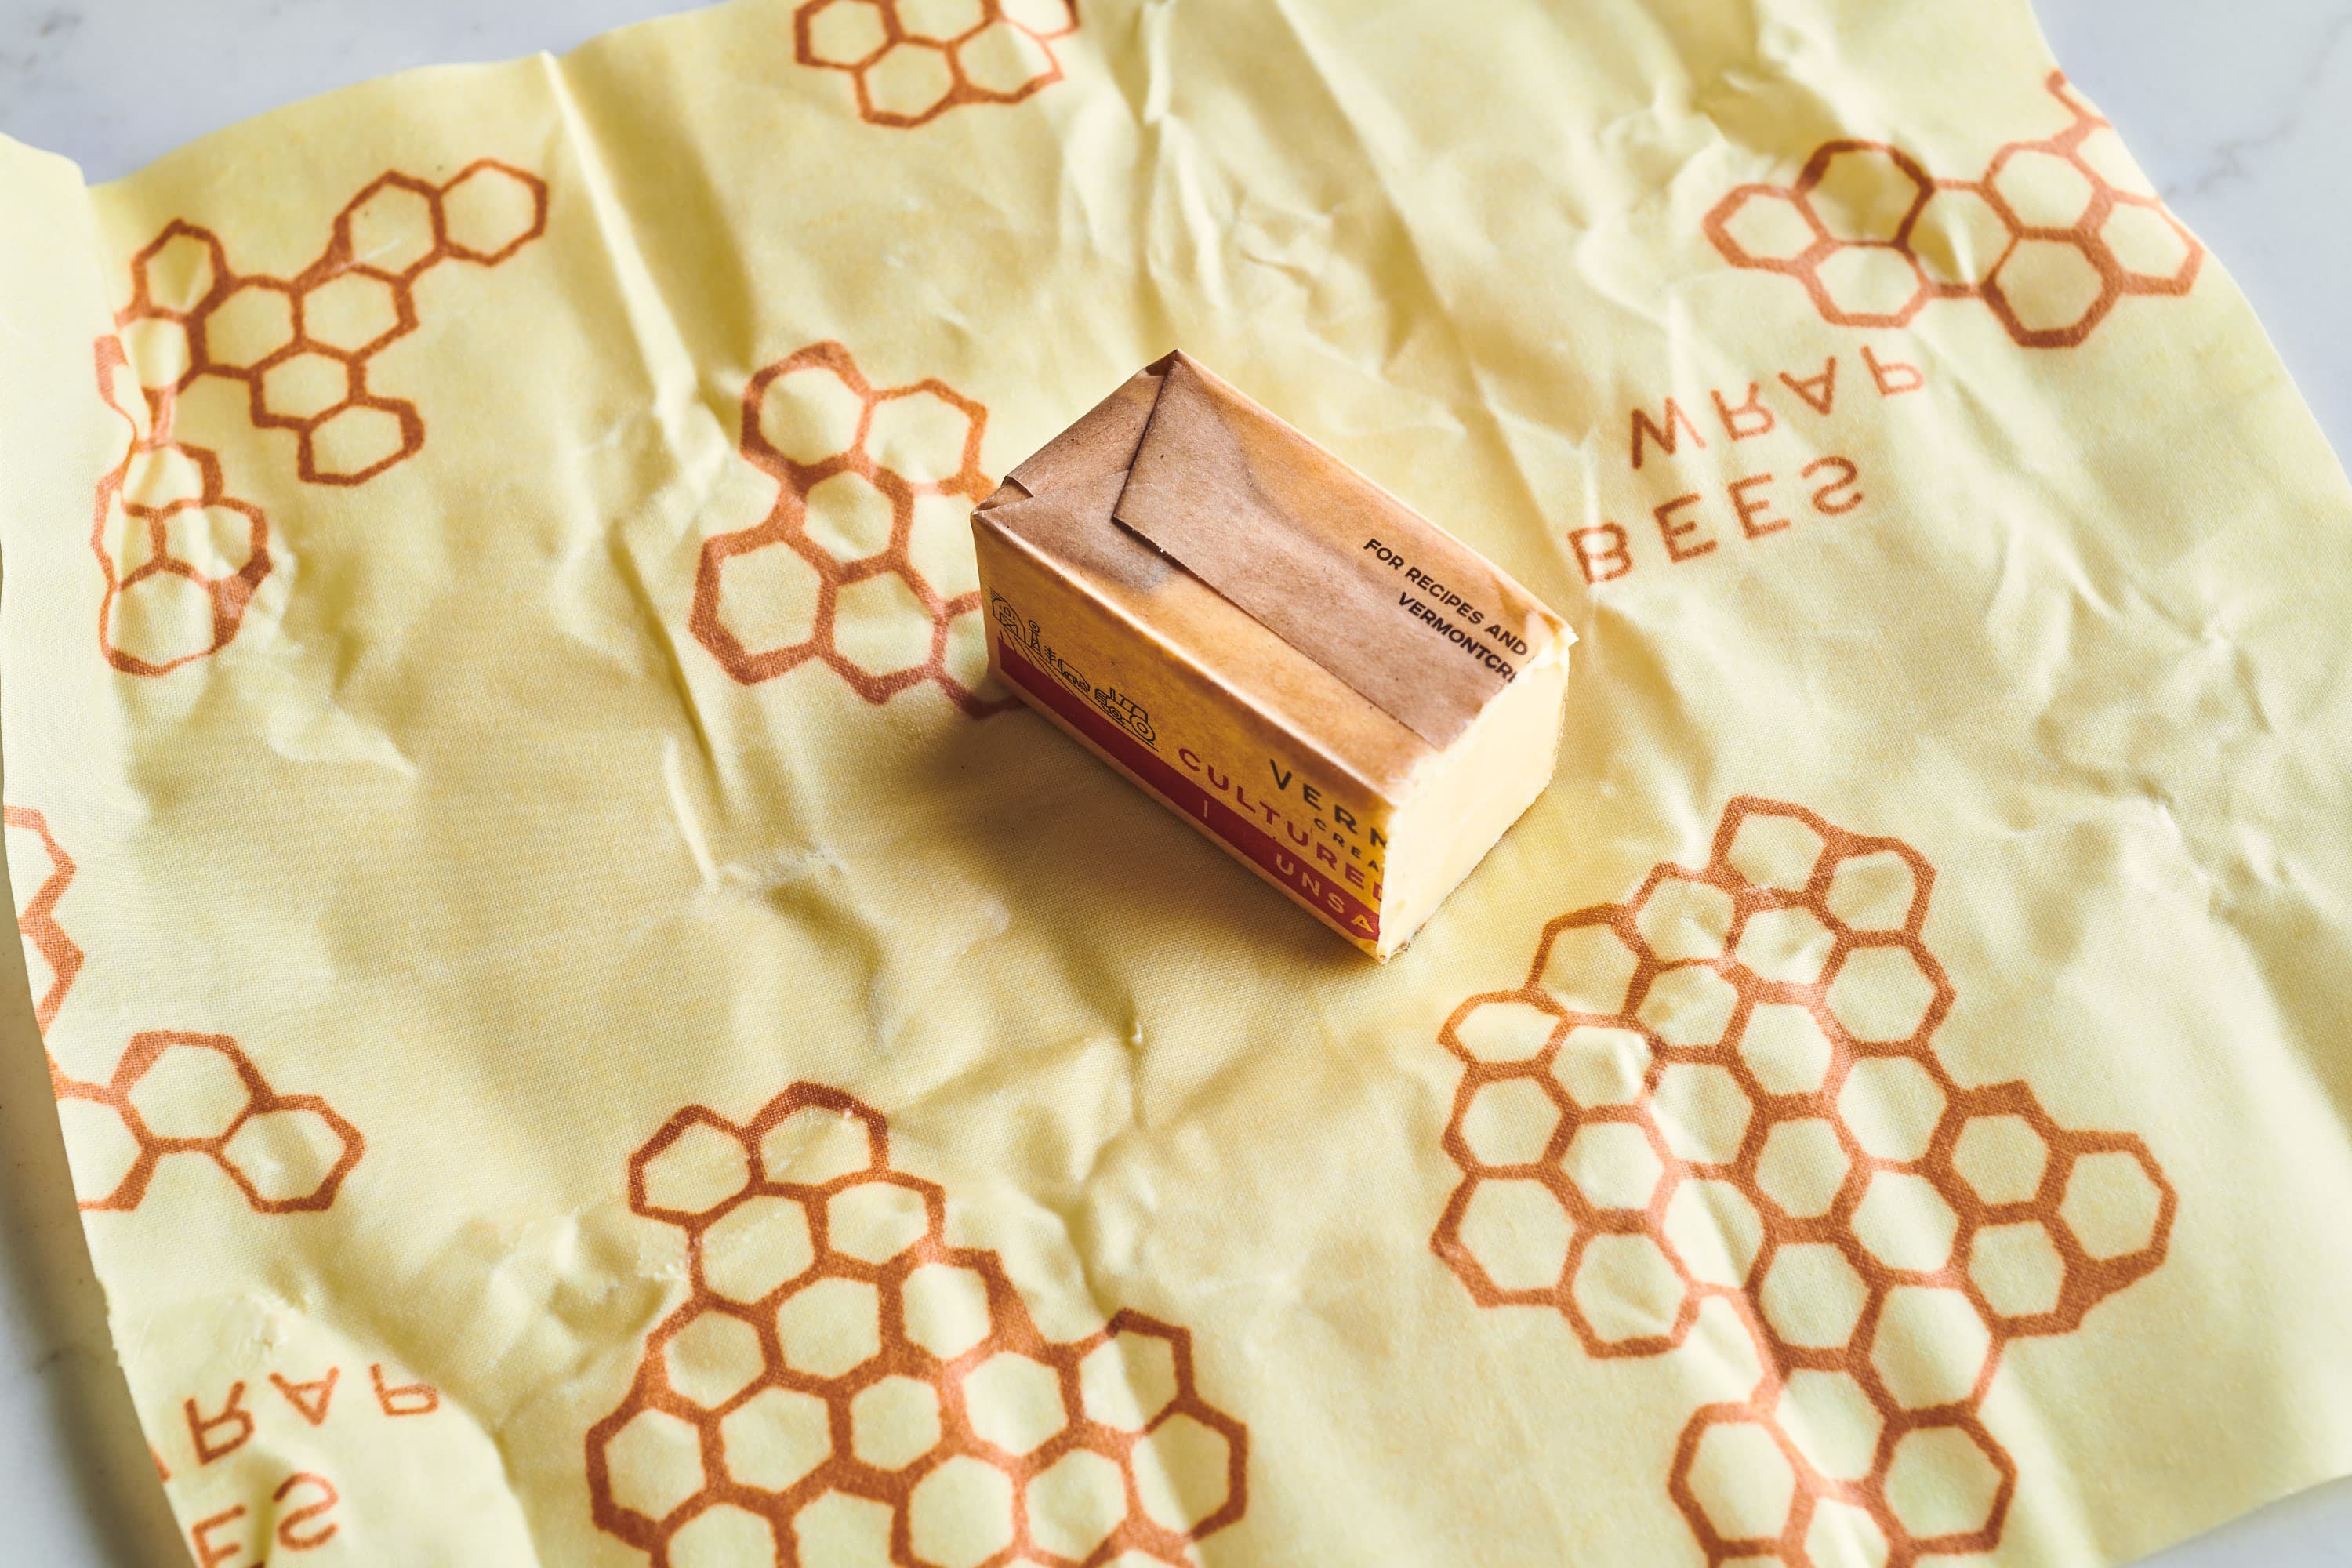 4 reasons why you should switch to honeycomb paper wrap